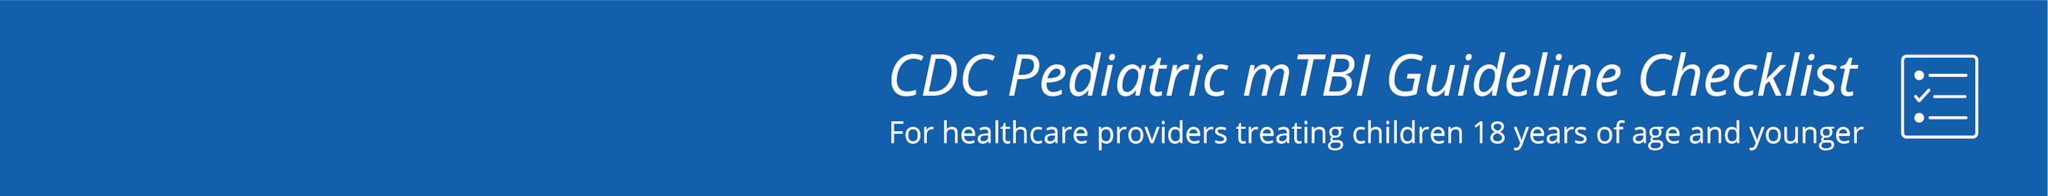 CDC Pediatric mTBI Guideline Checklist: For healthcare providers treating children 18 years of age and younger.